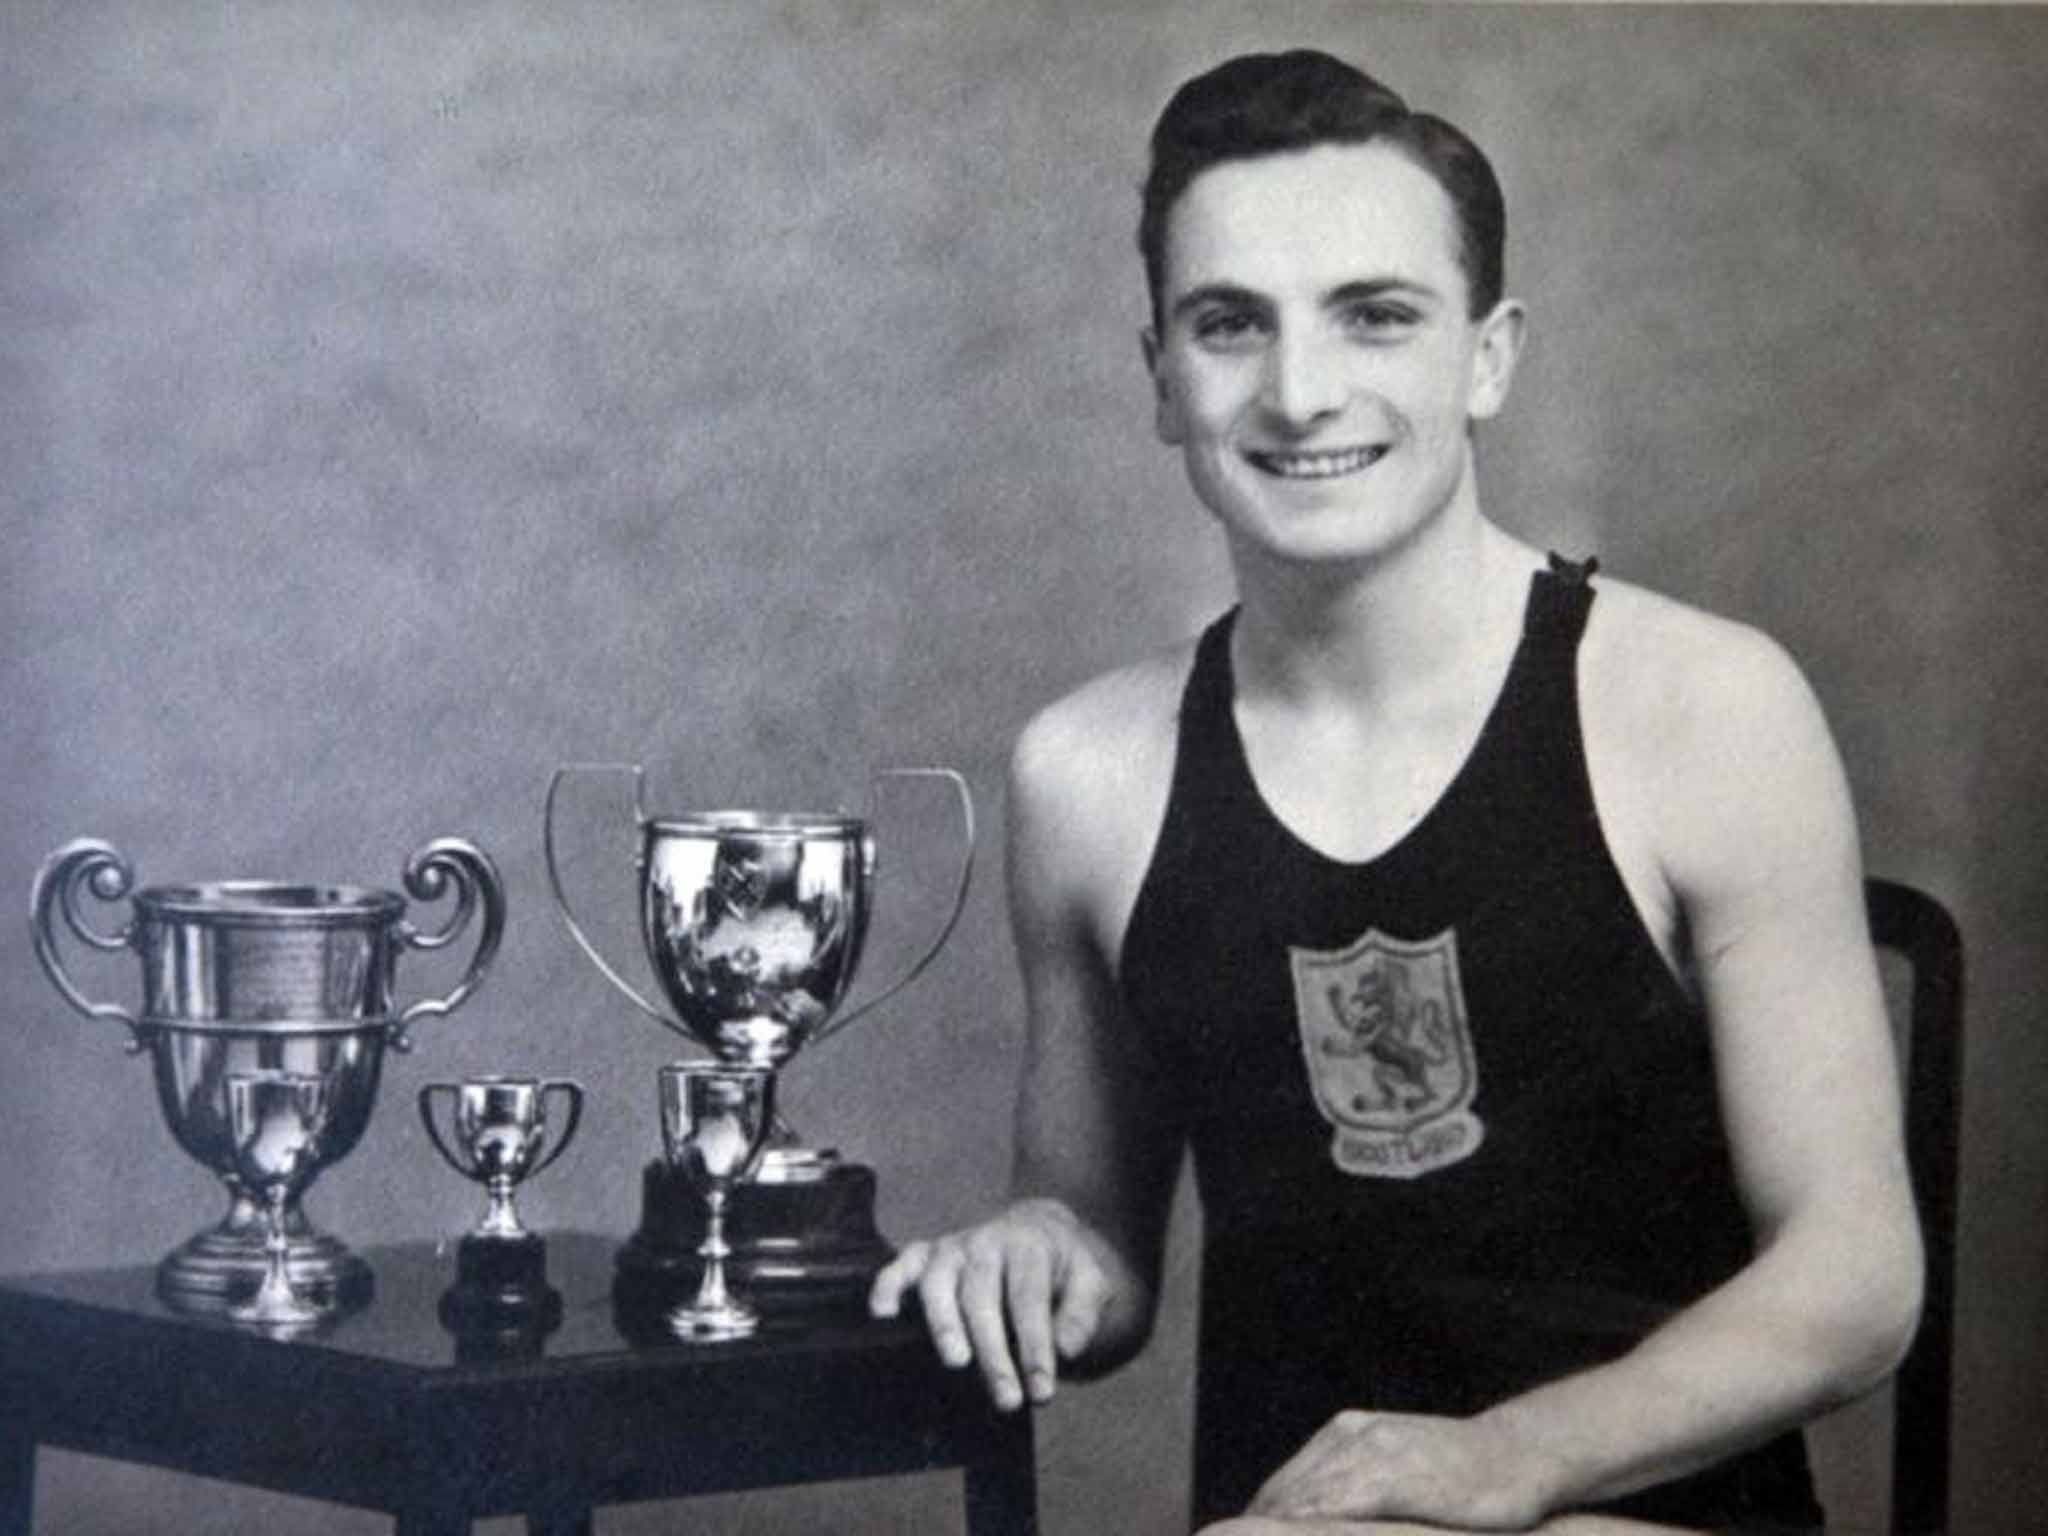 Heatly in 1942 with some of his trophies: 'I would like to have had what Tom Daley has now!' he joked in later life (PA)